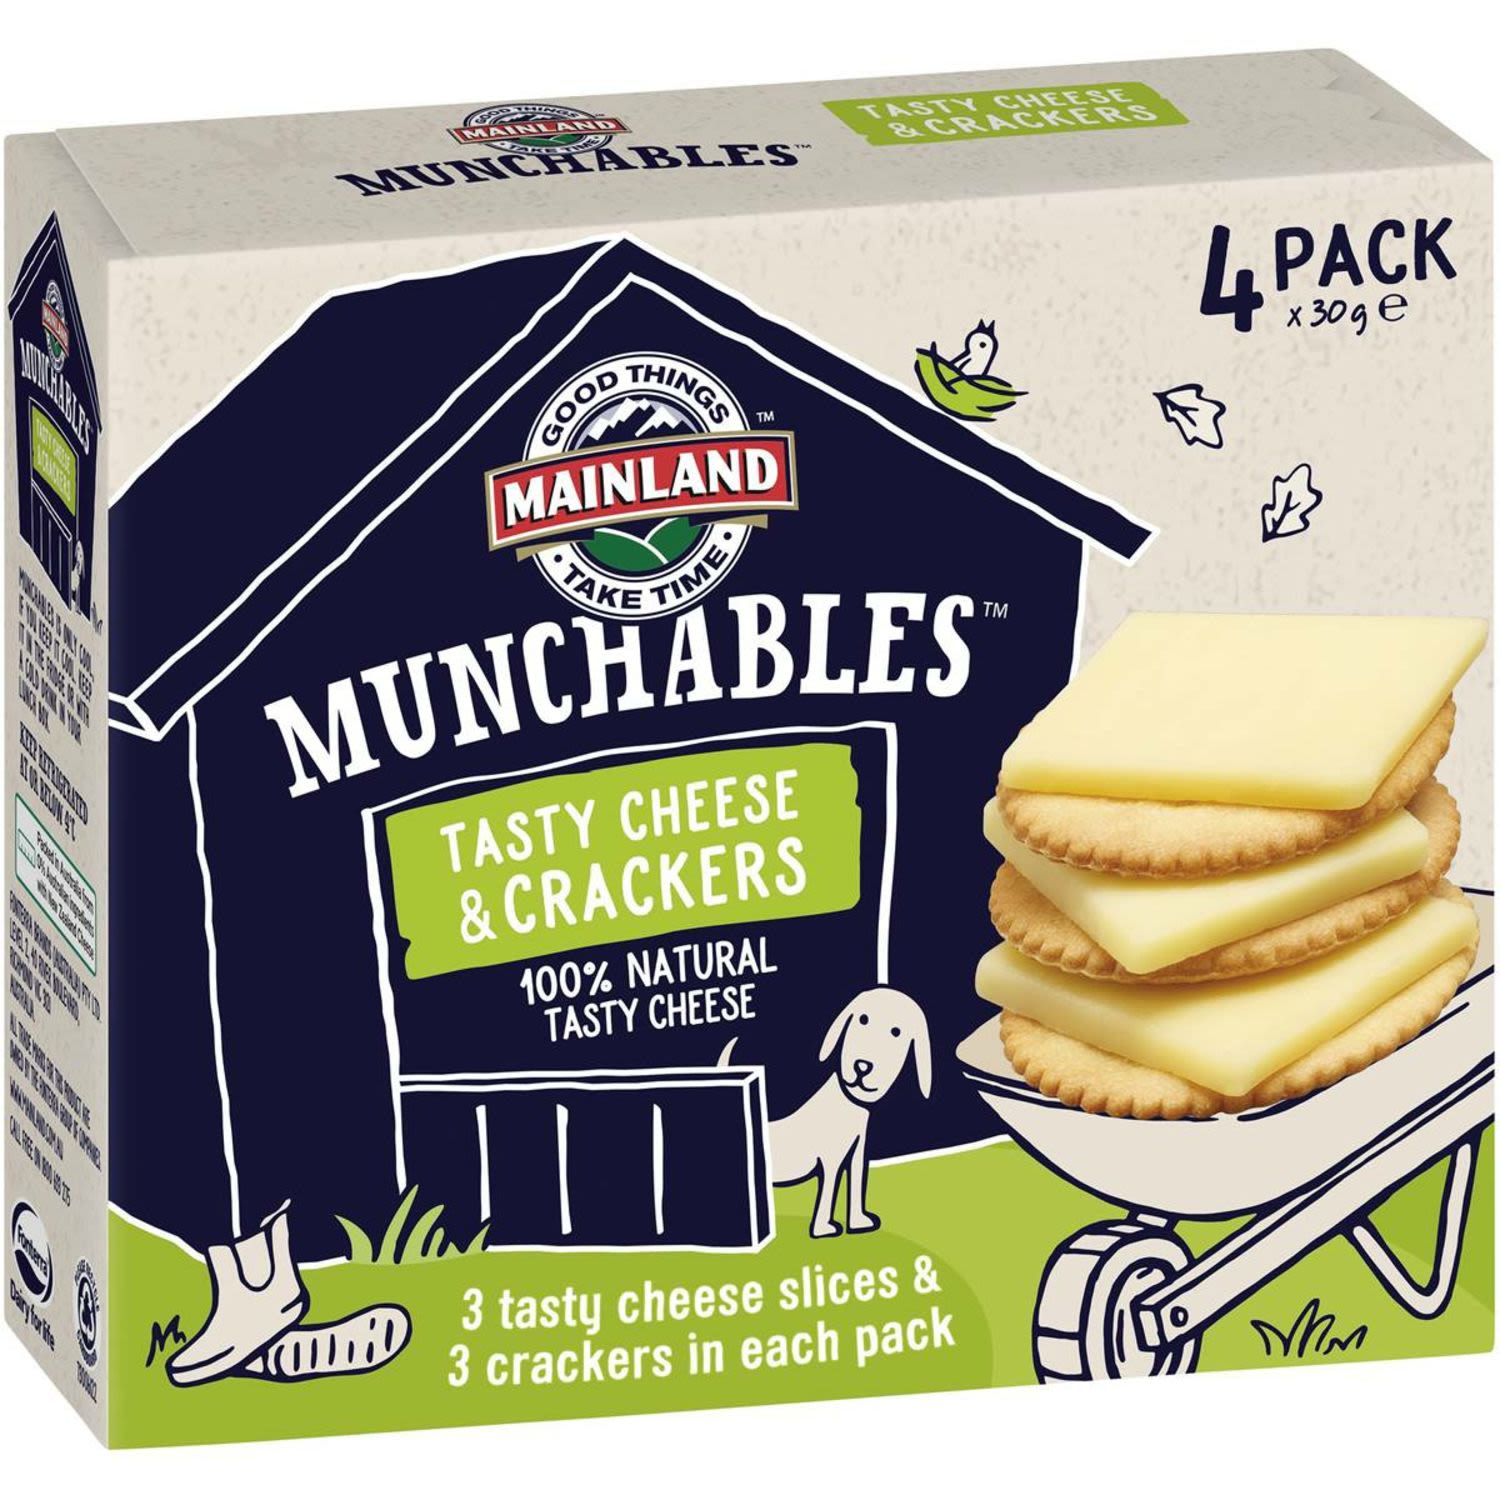 Mainland Munchables Tasty Cheese & Crackers, 4 Each